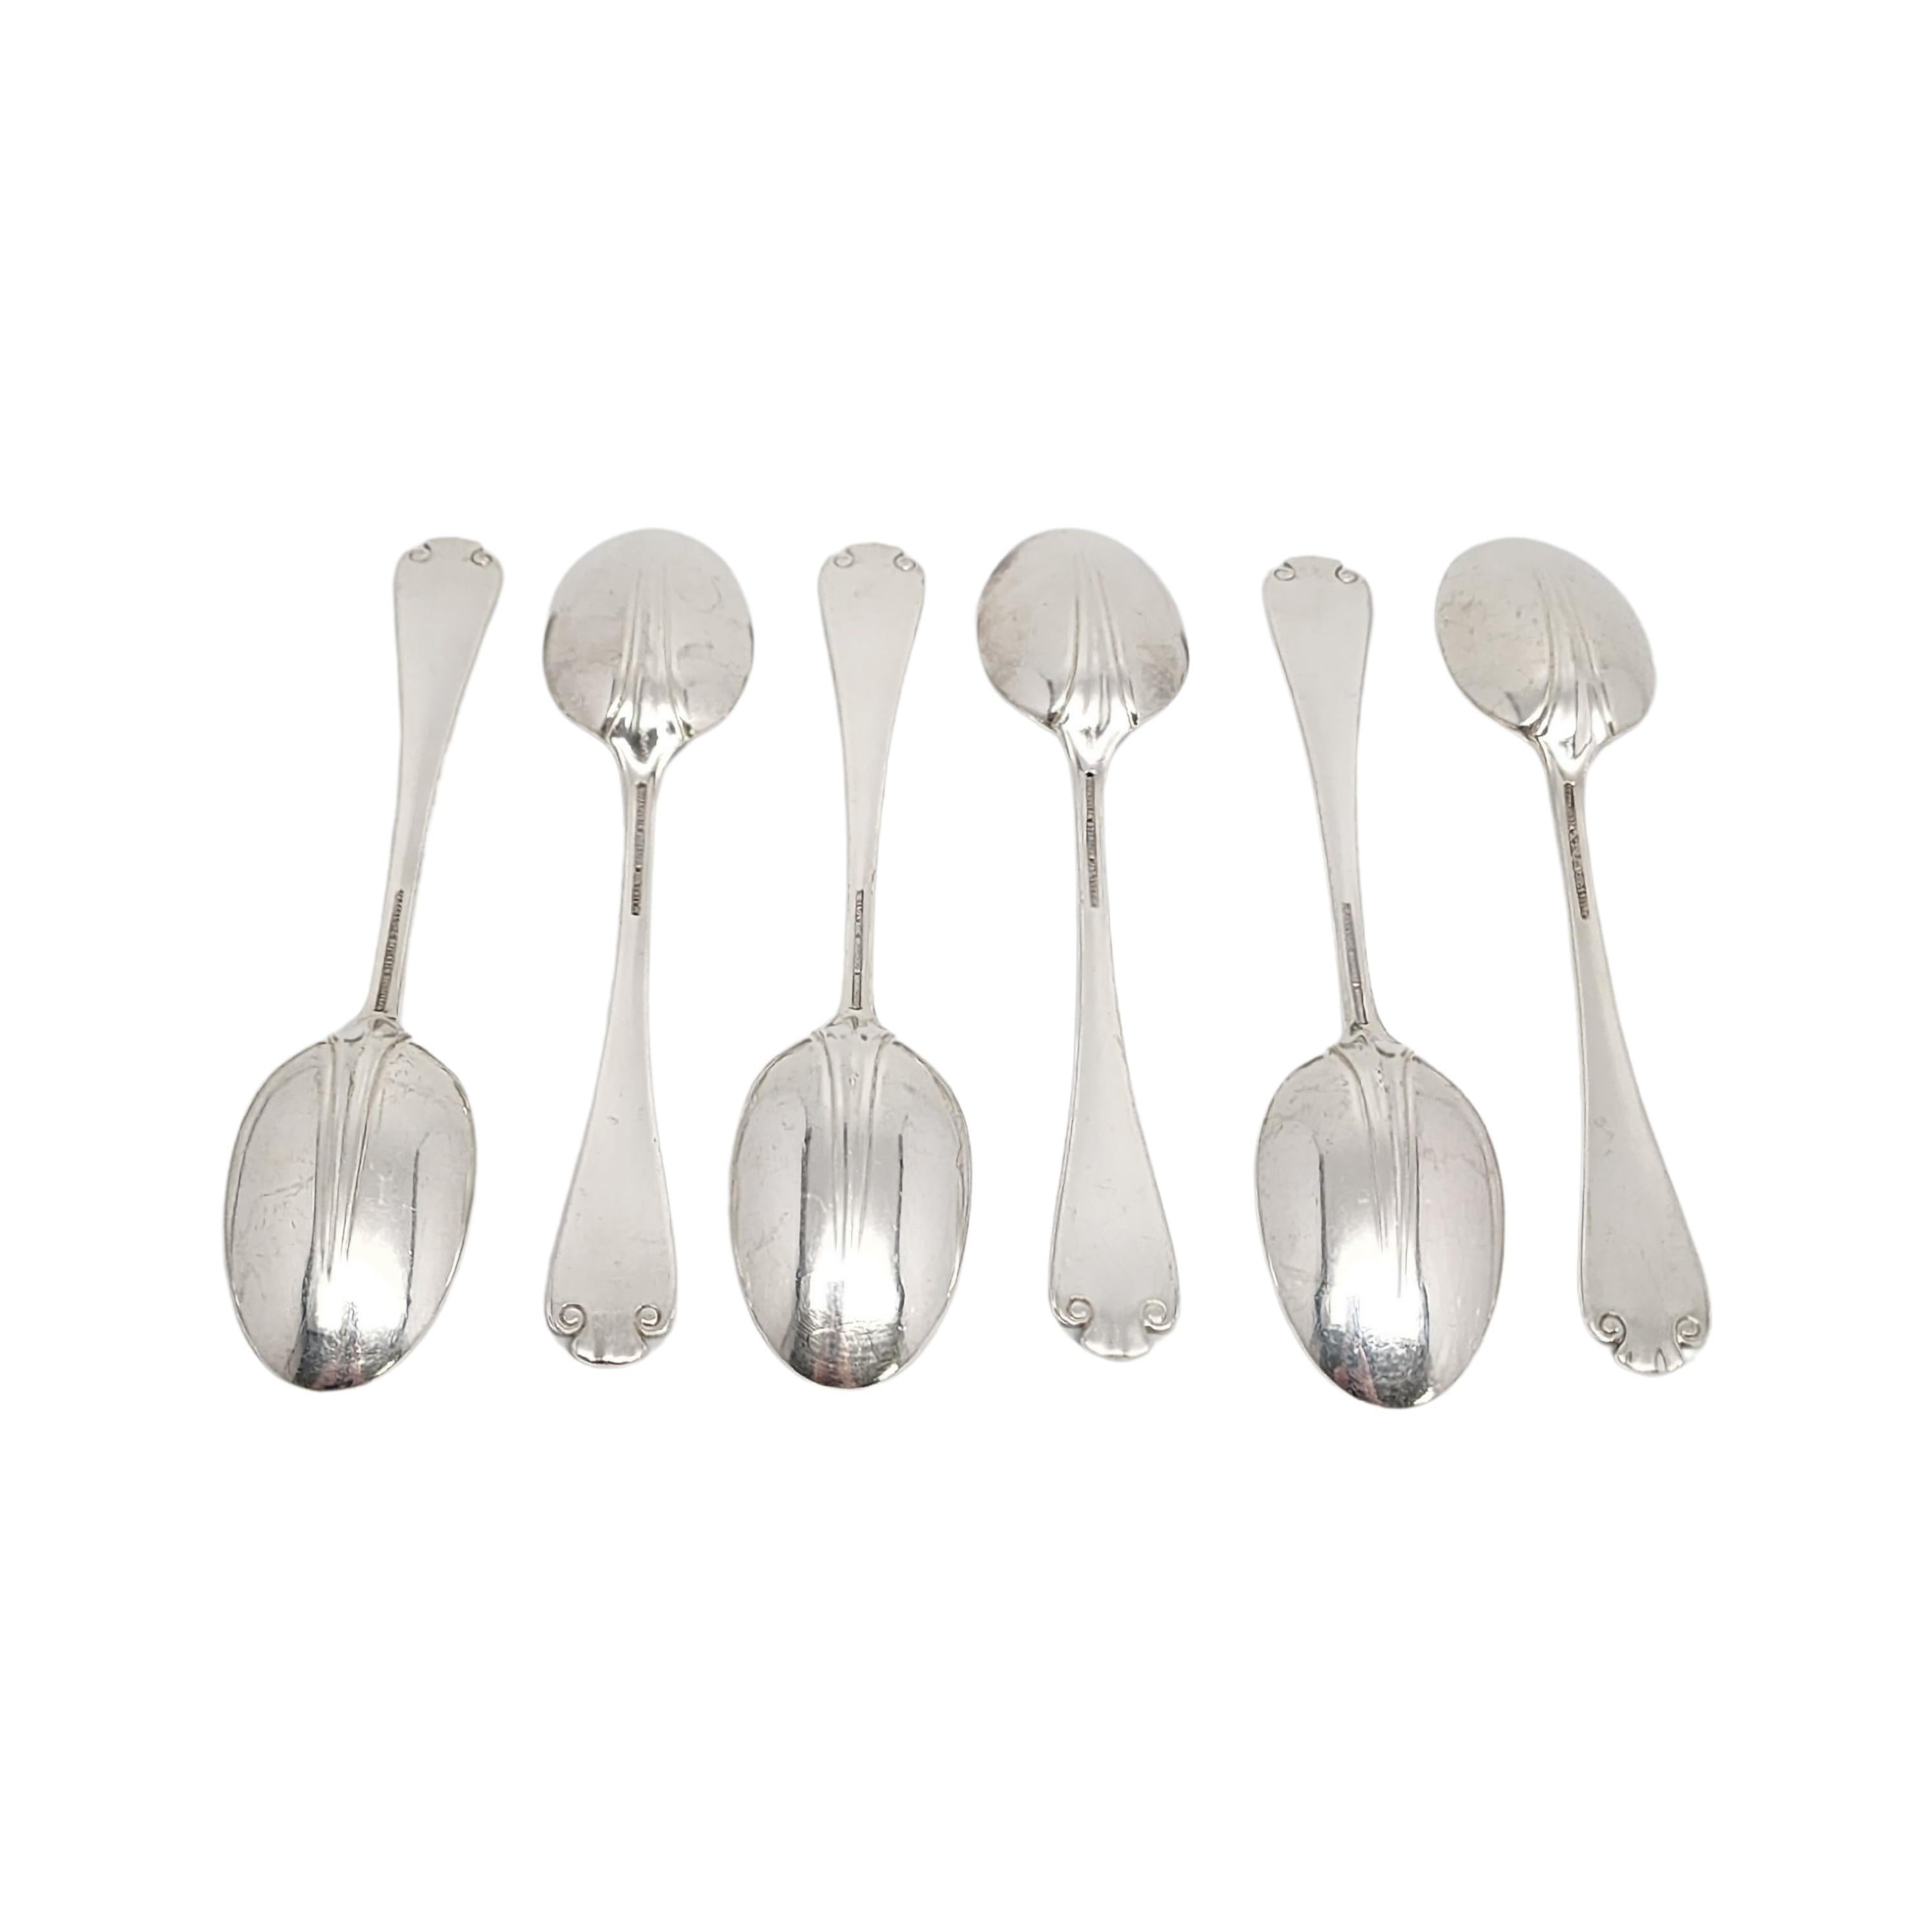 Set of 6 sterling silver teaspoons by Tiffany & Co in the Flemish pattern.

No monogram.

The Flemish pattern features a simple and elegant scroll design, making it a timeless classic that is still in demand today. Hallmarks date these pieces to